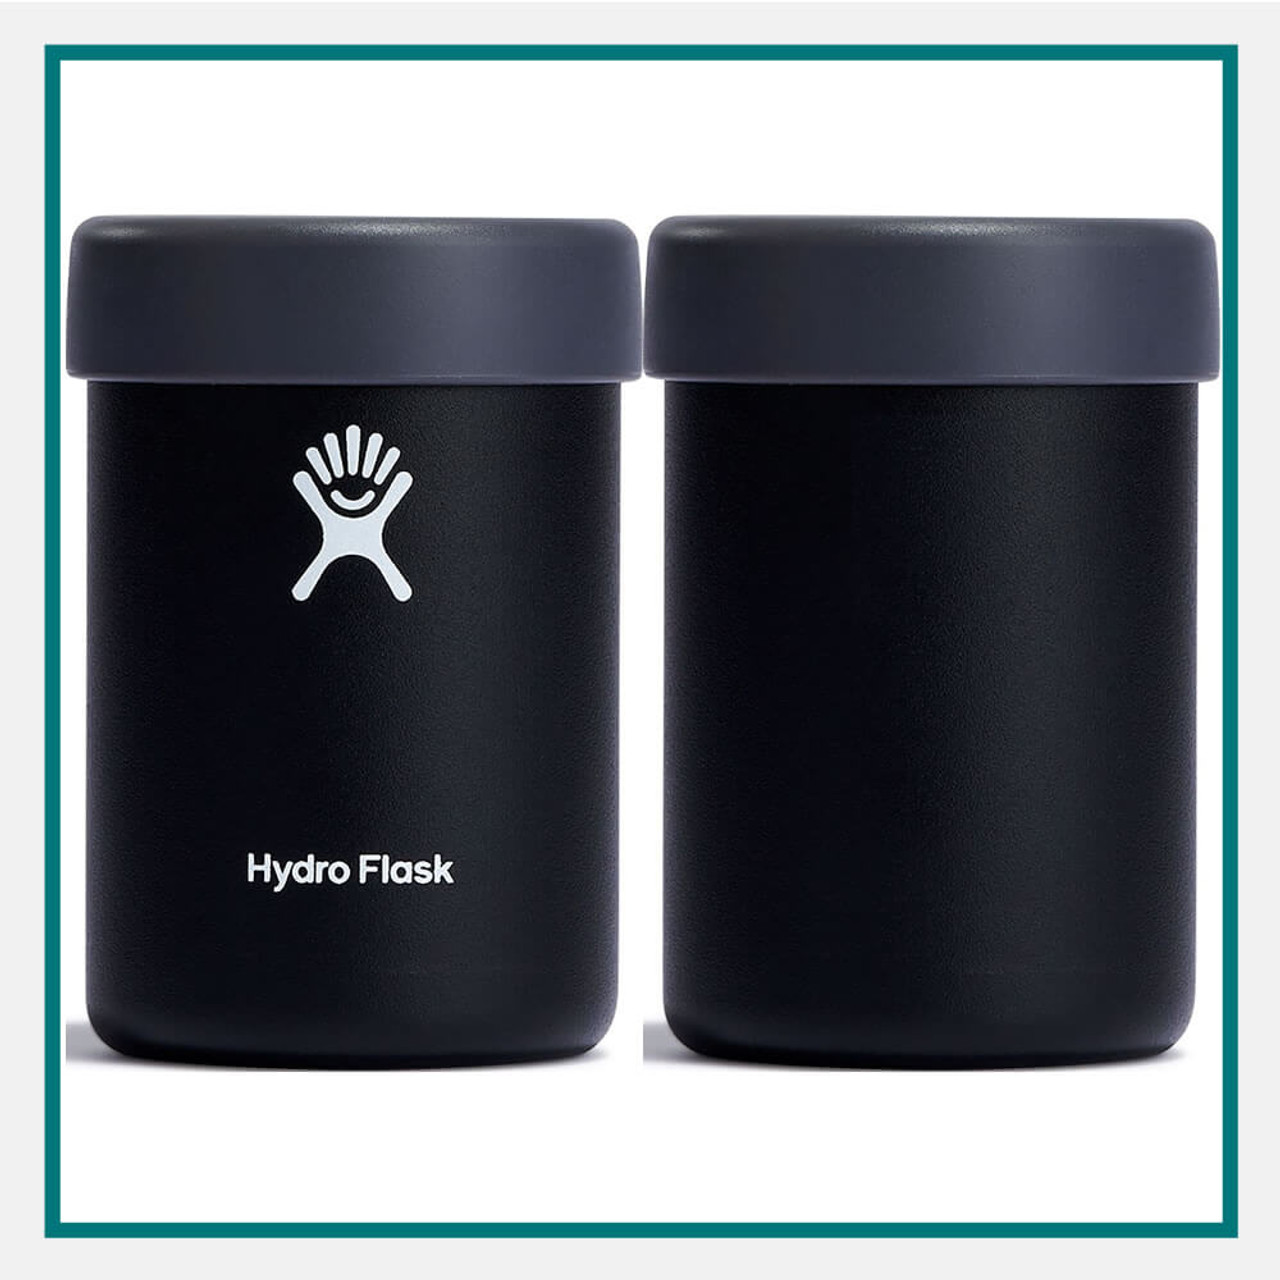 Hydro Flask Cooler Cup, Pacific, 12 Ounce